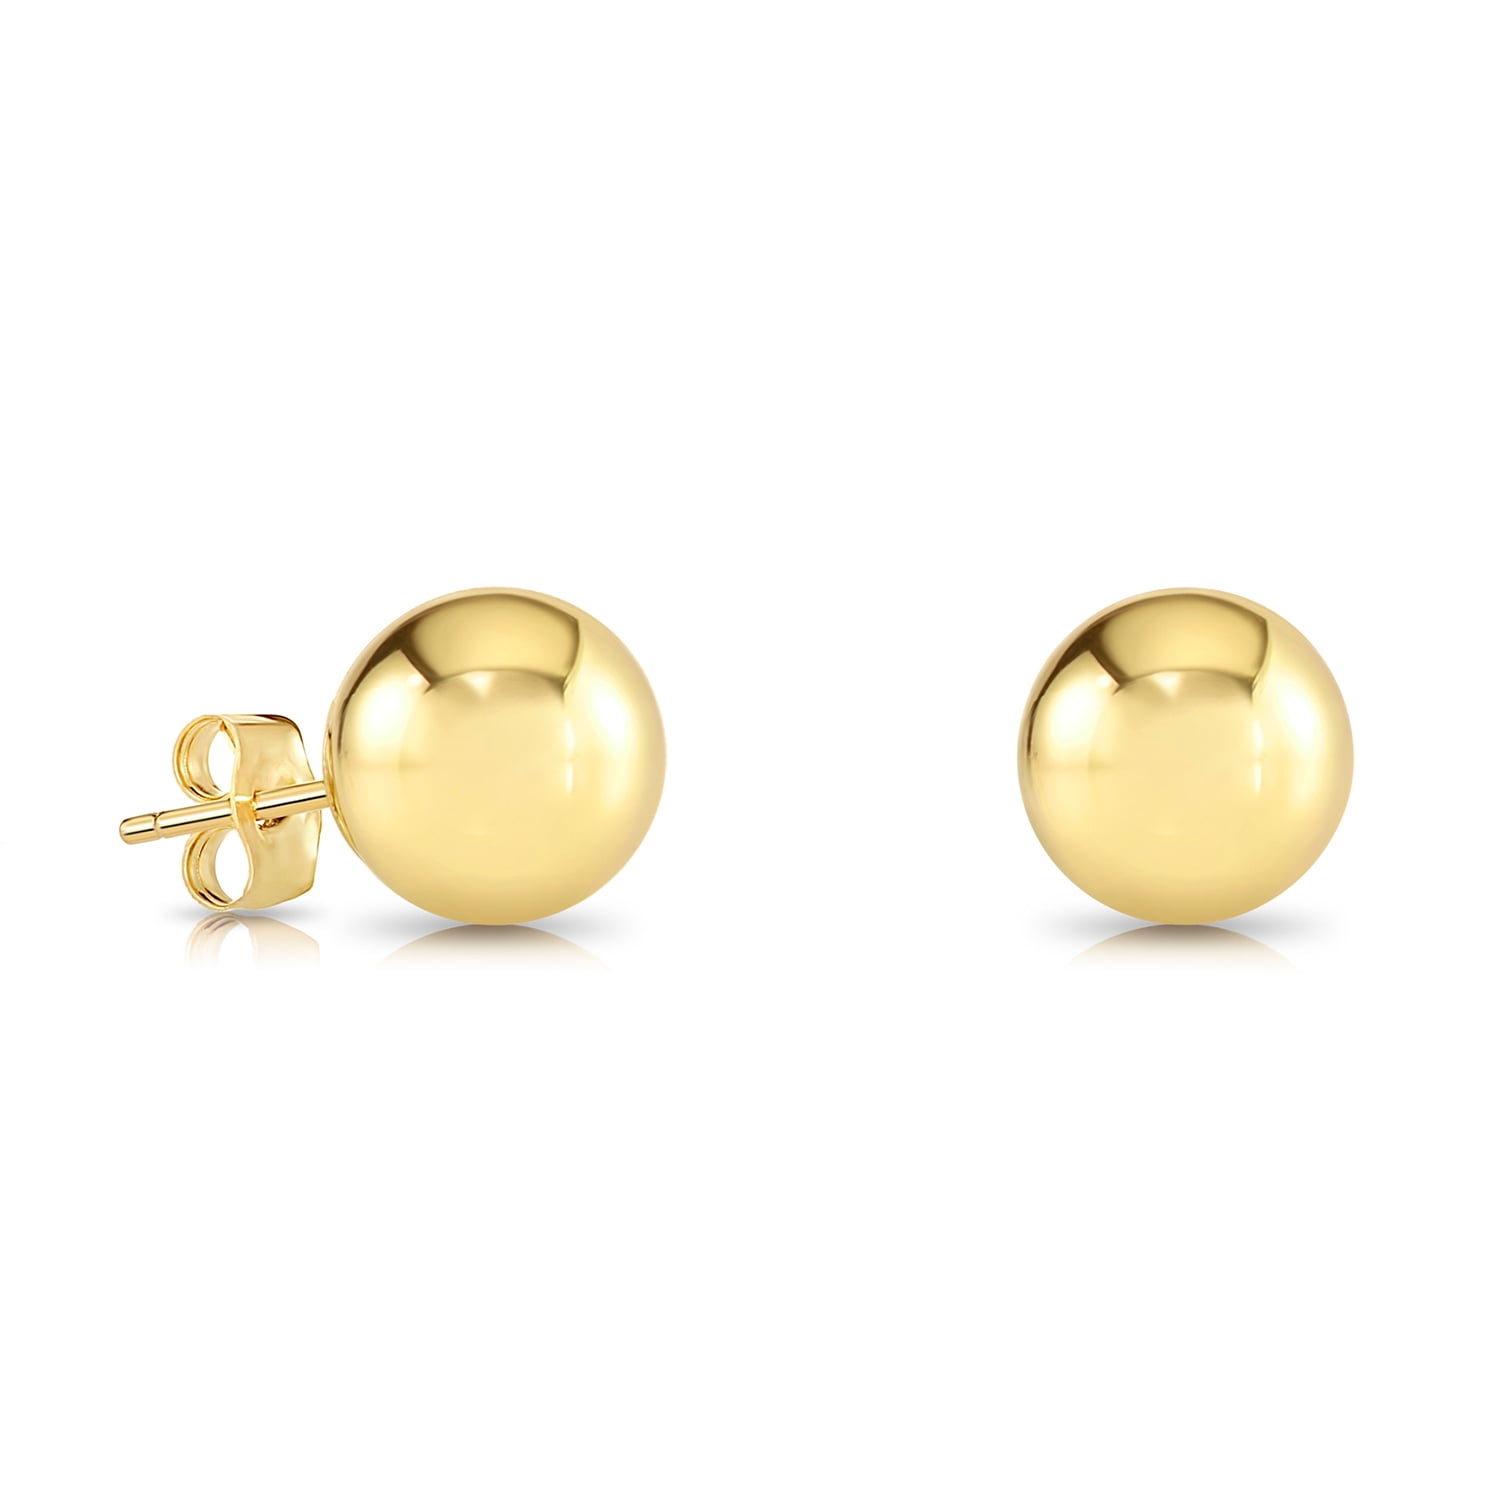  14k Yellow Gold Ball Stud Earrings with Secure Screw-backs  (3mm): Clothing, Shoes & Jewelry